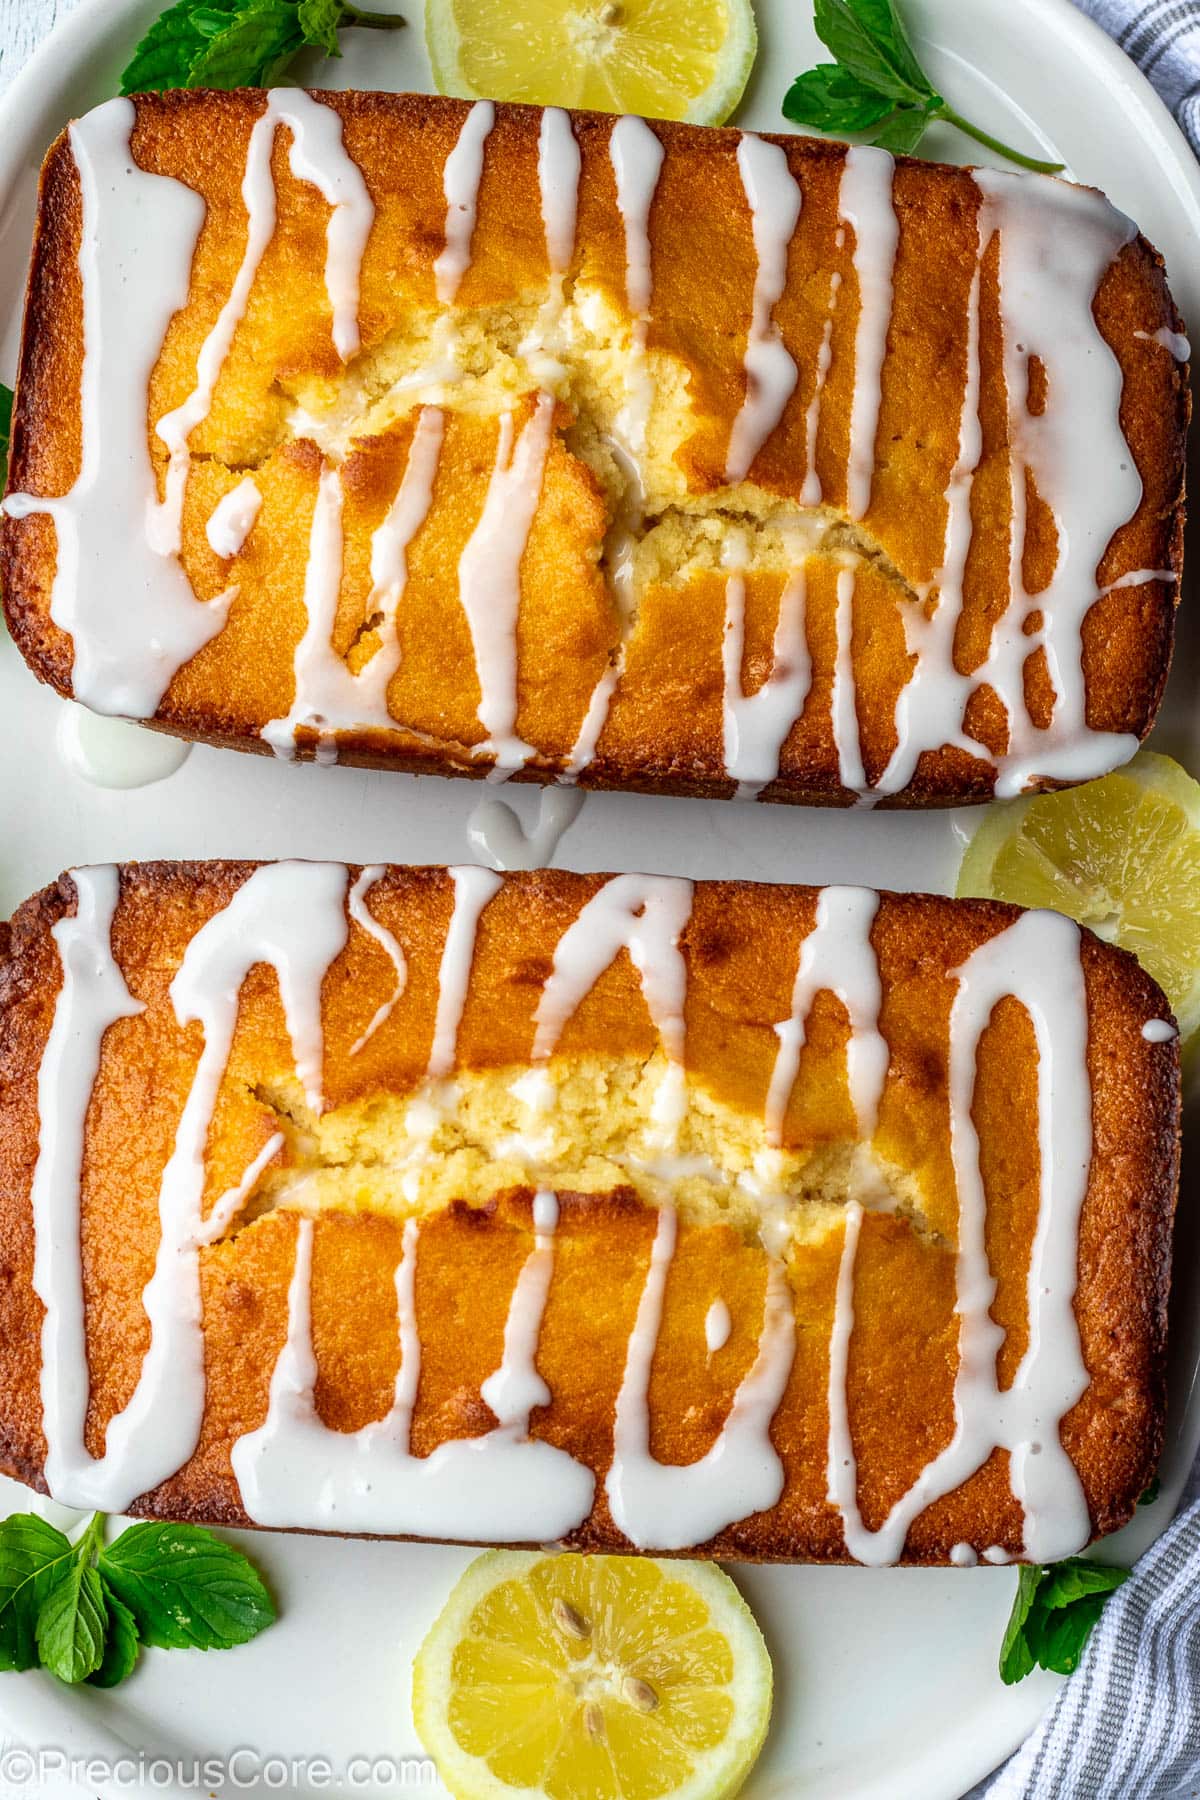 Two loaf cakes with drizzles of lemon glaze on top.